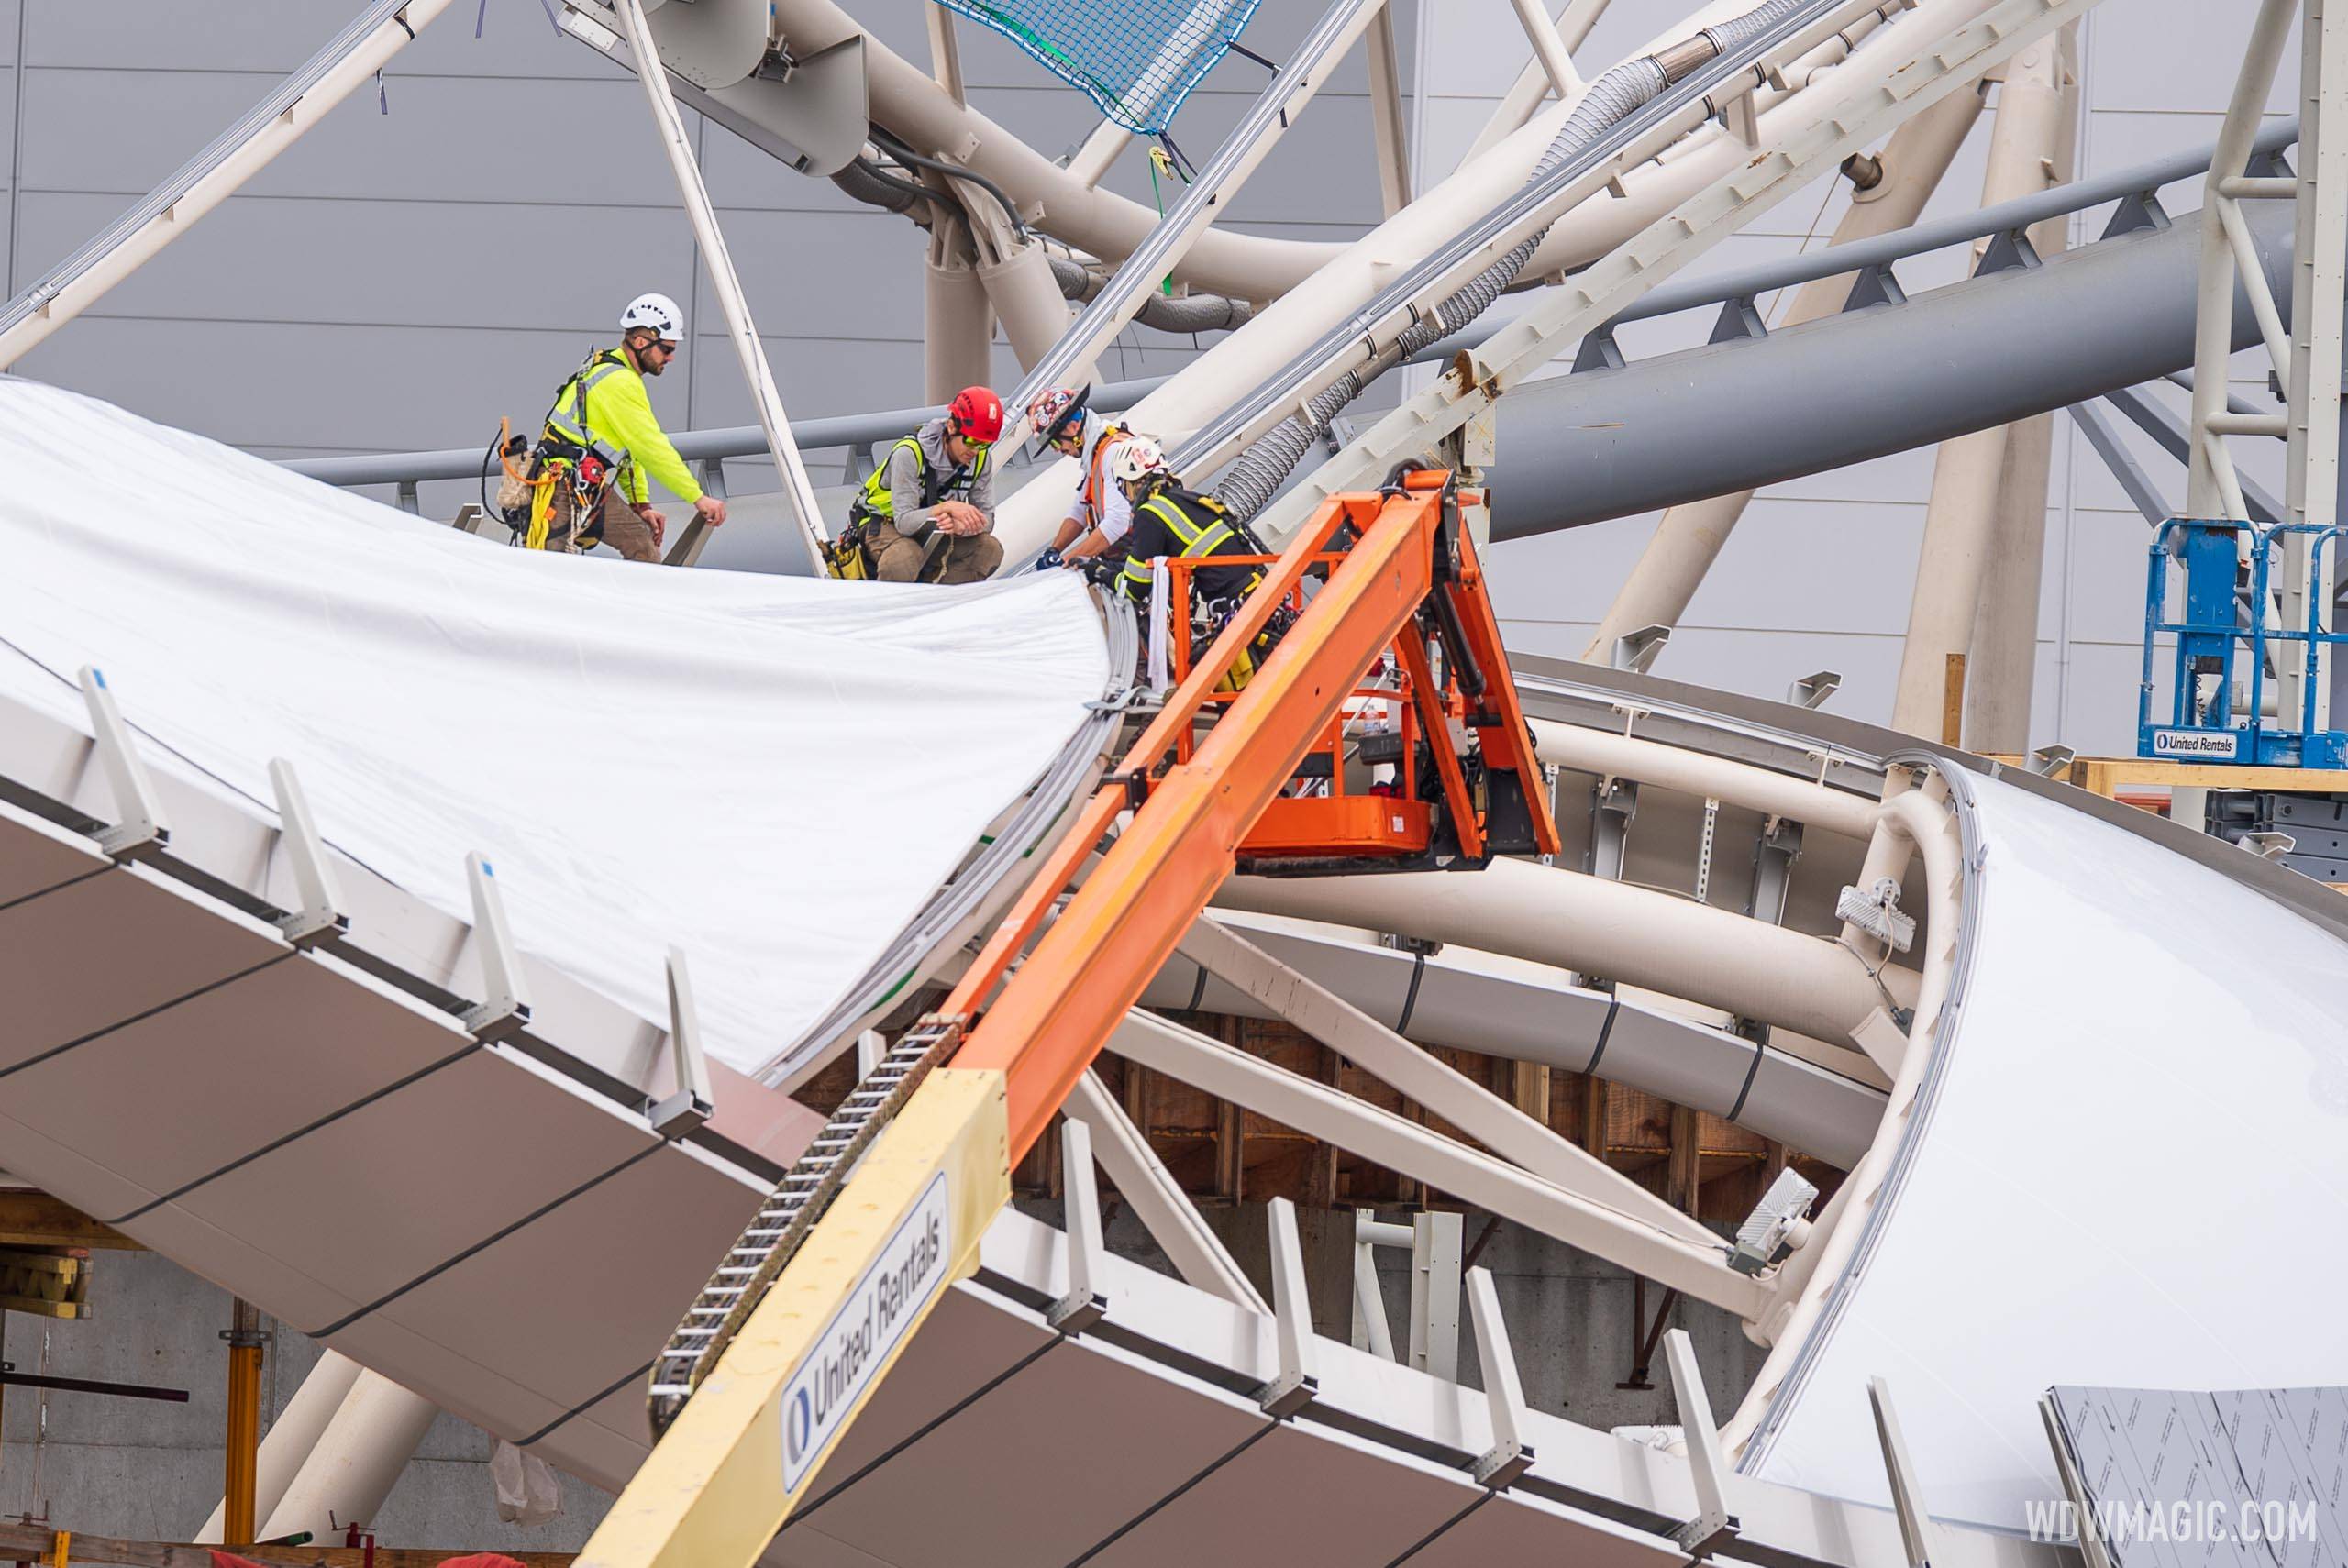 Latest look at the ETFE cushion canopy installation at TRON Lightcycle Run in Magic Kingdom